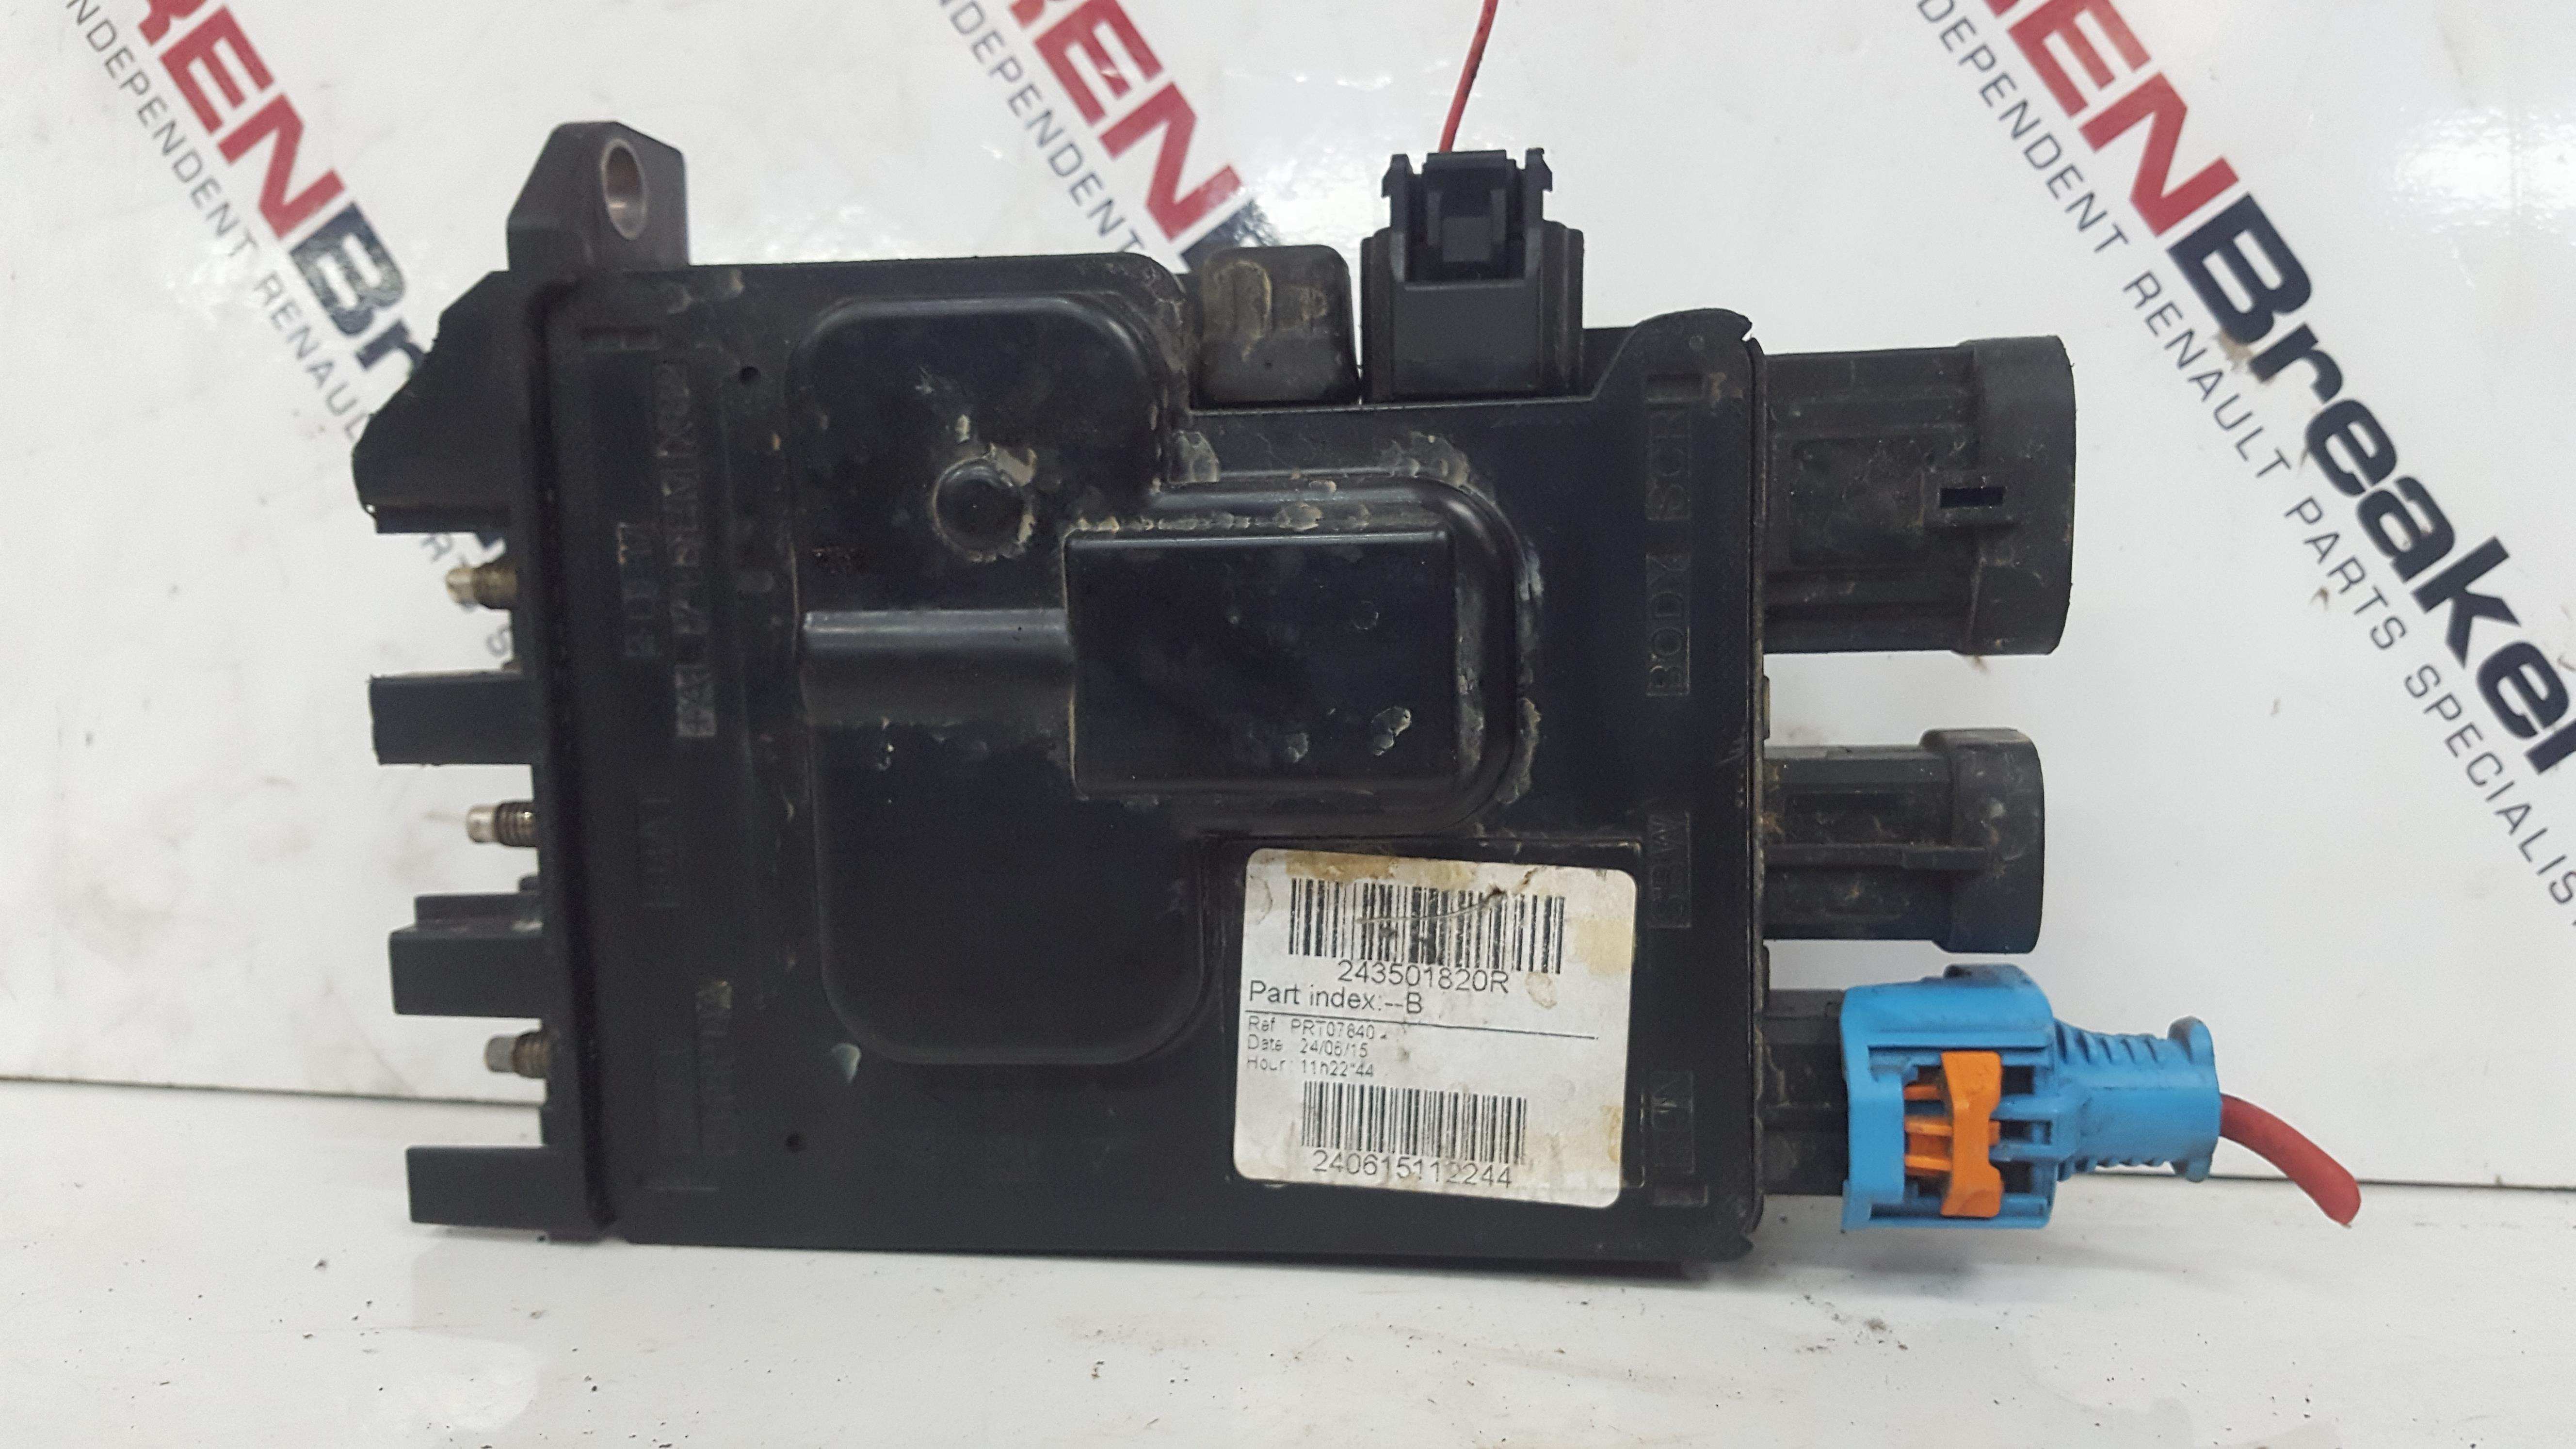 Renault Trafic MK3 Fuse BOX Terminal 243501820R - Store - Renault Breakers - Used Renault Car Parts & Spares Specialist